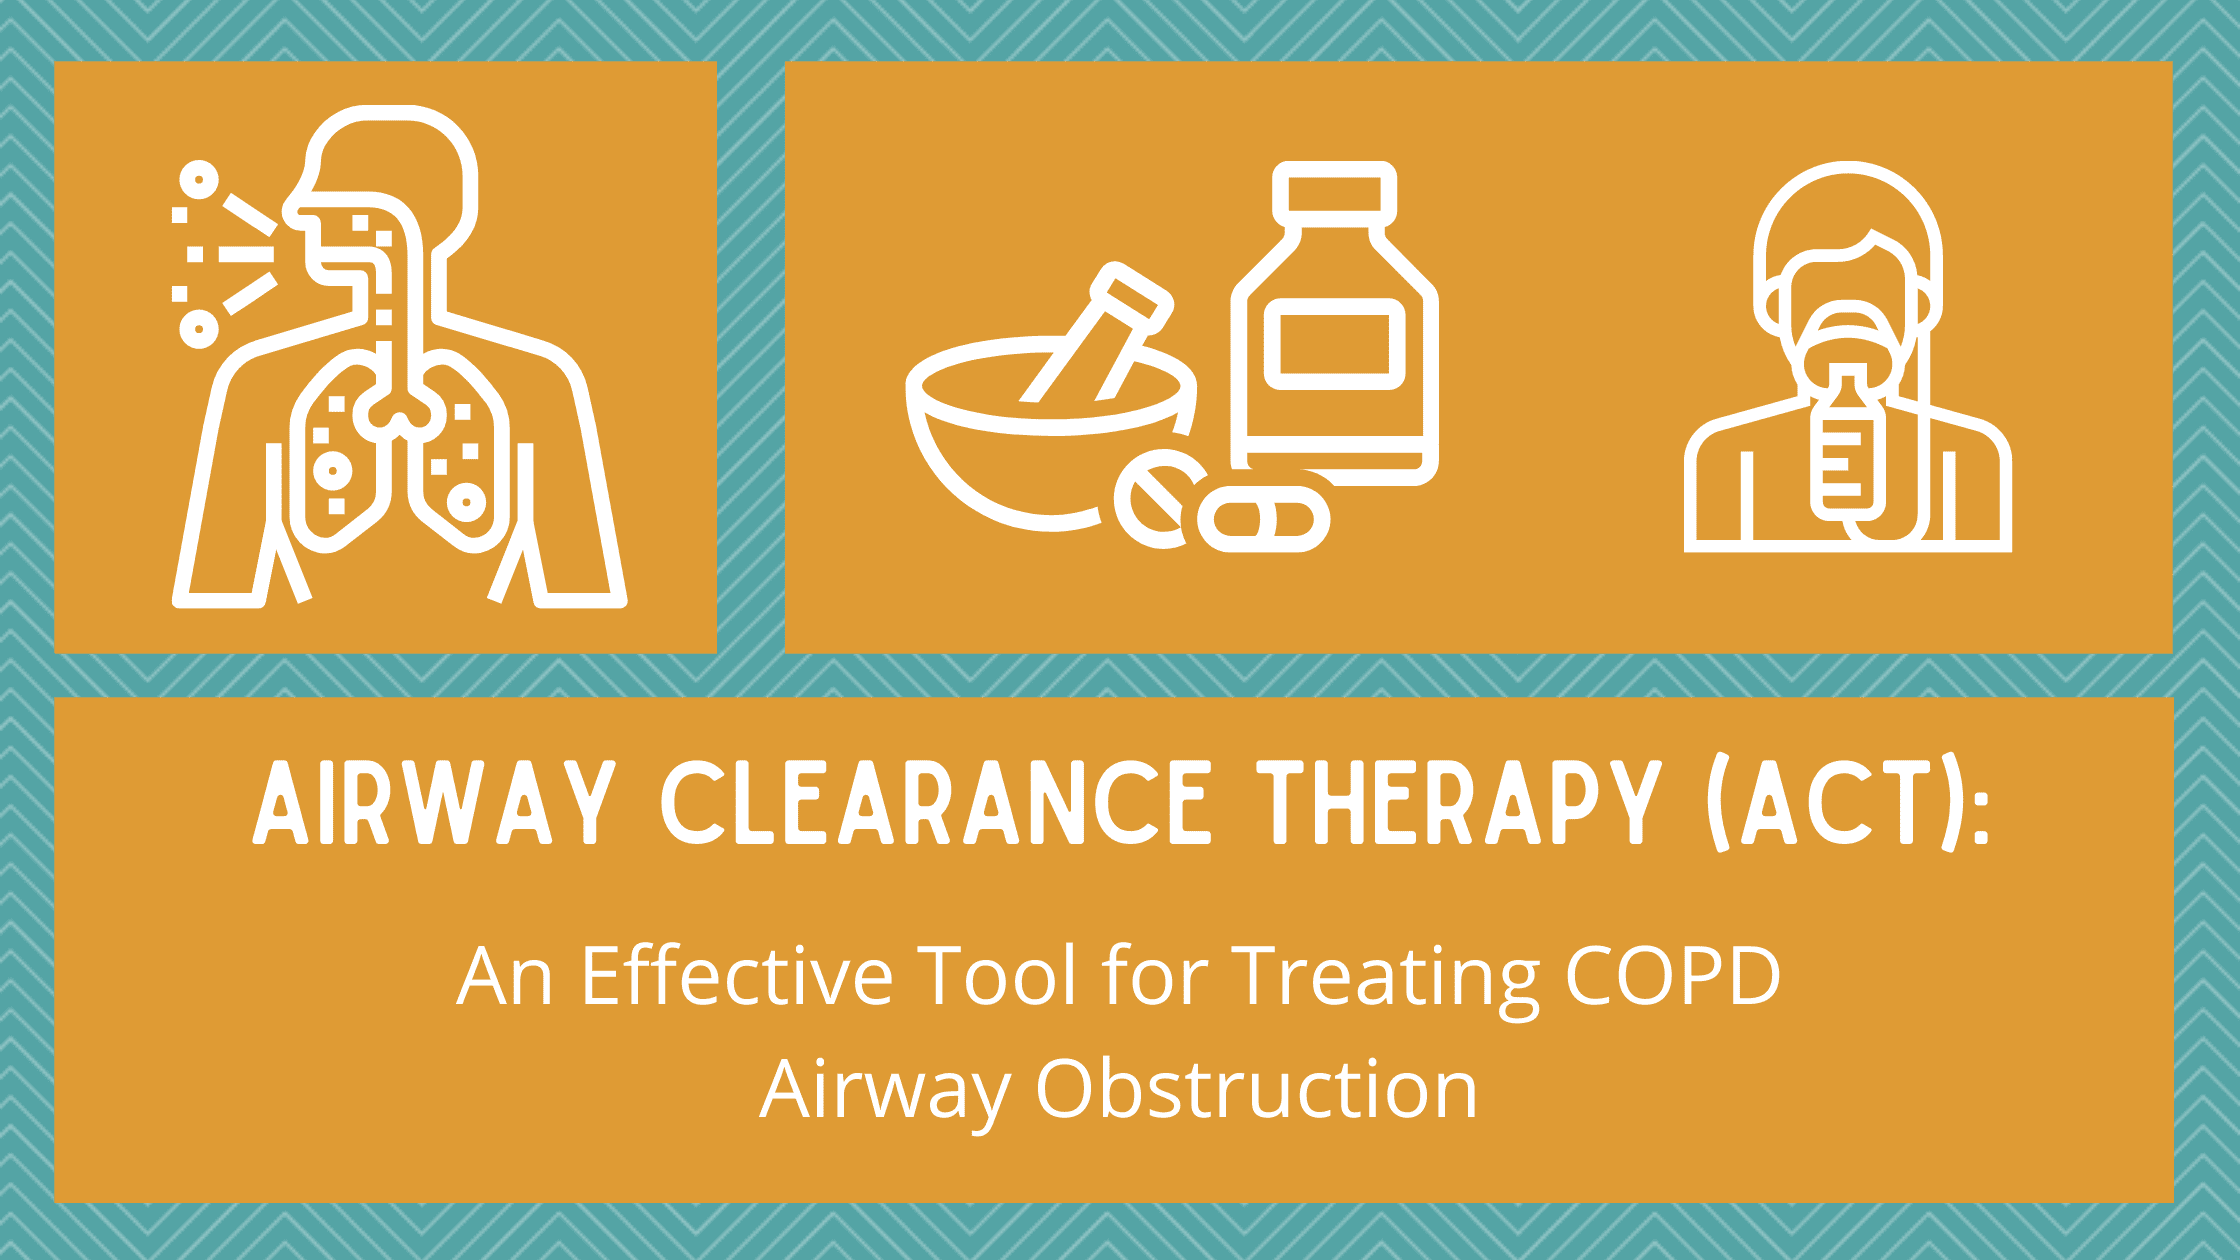 Airway Clearance Therapy (ACT): An Effective Tool for Treating COPD Airway Obstruction